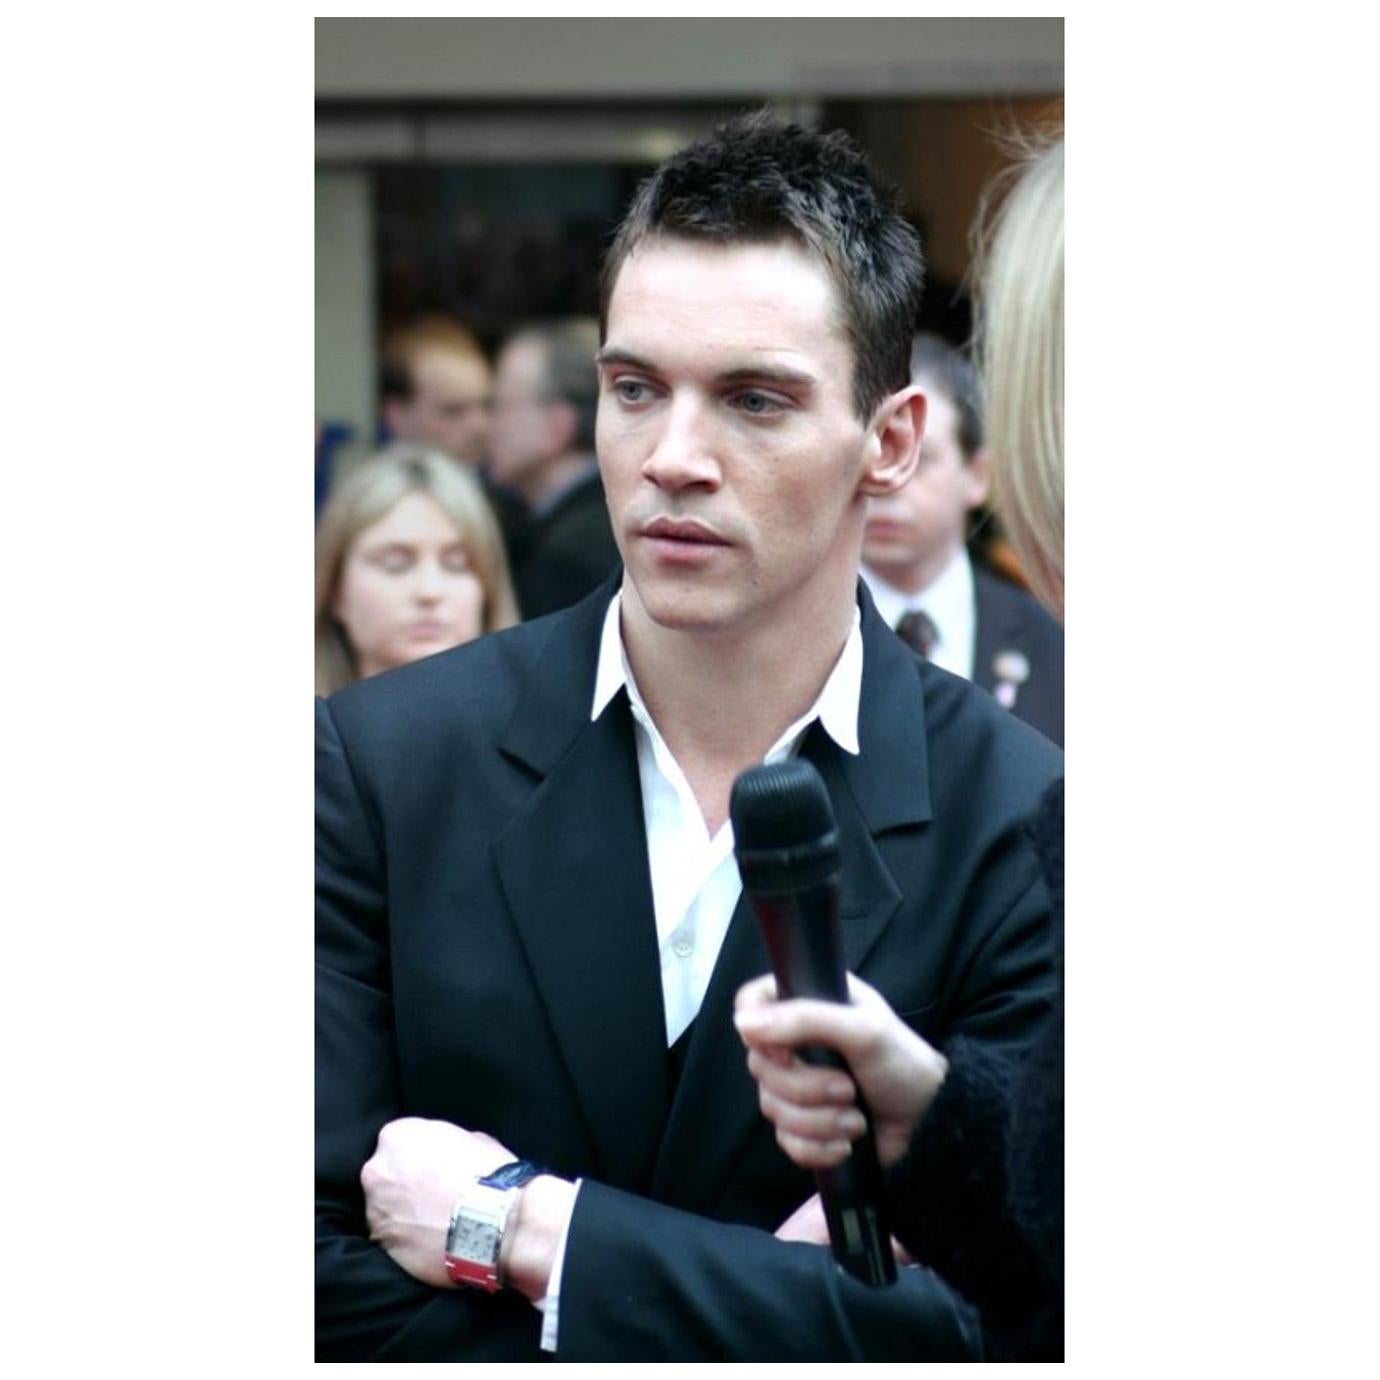 Jonathan Rhys Meyers Authentic Strand of Hair For Sale